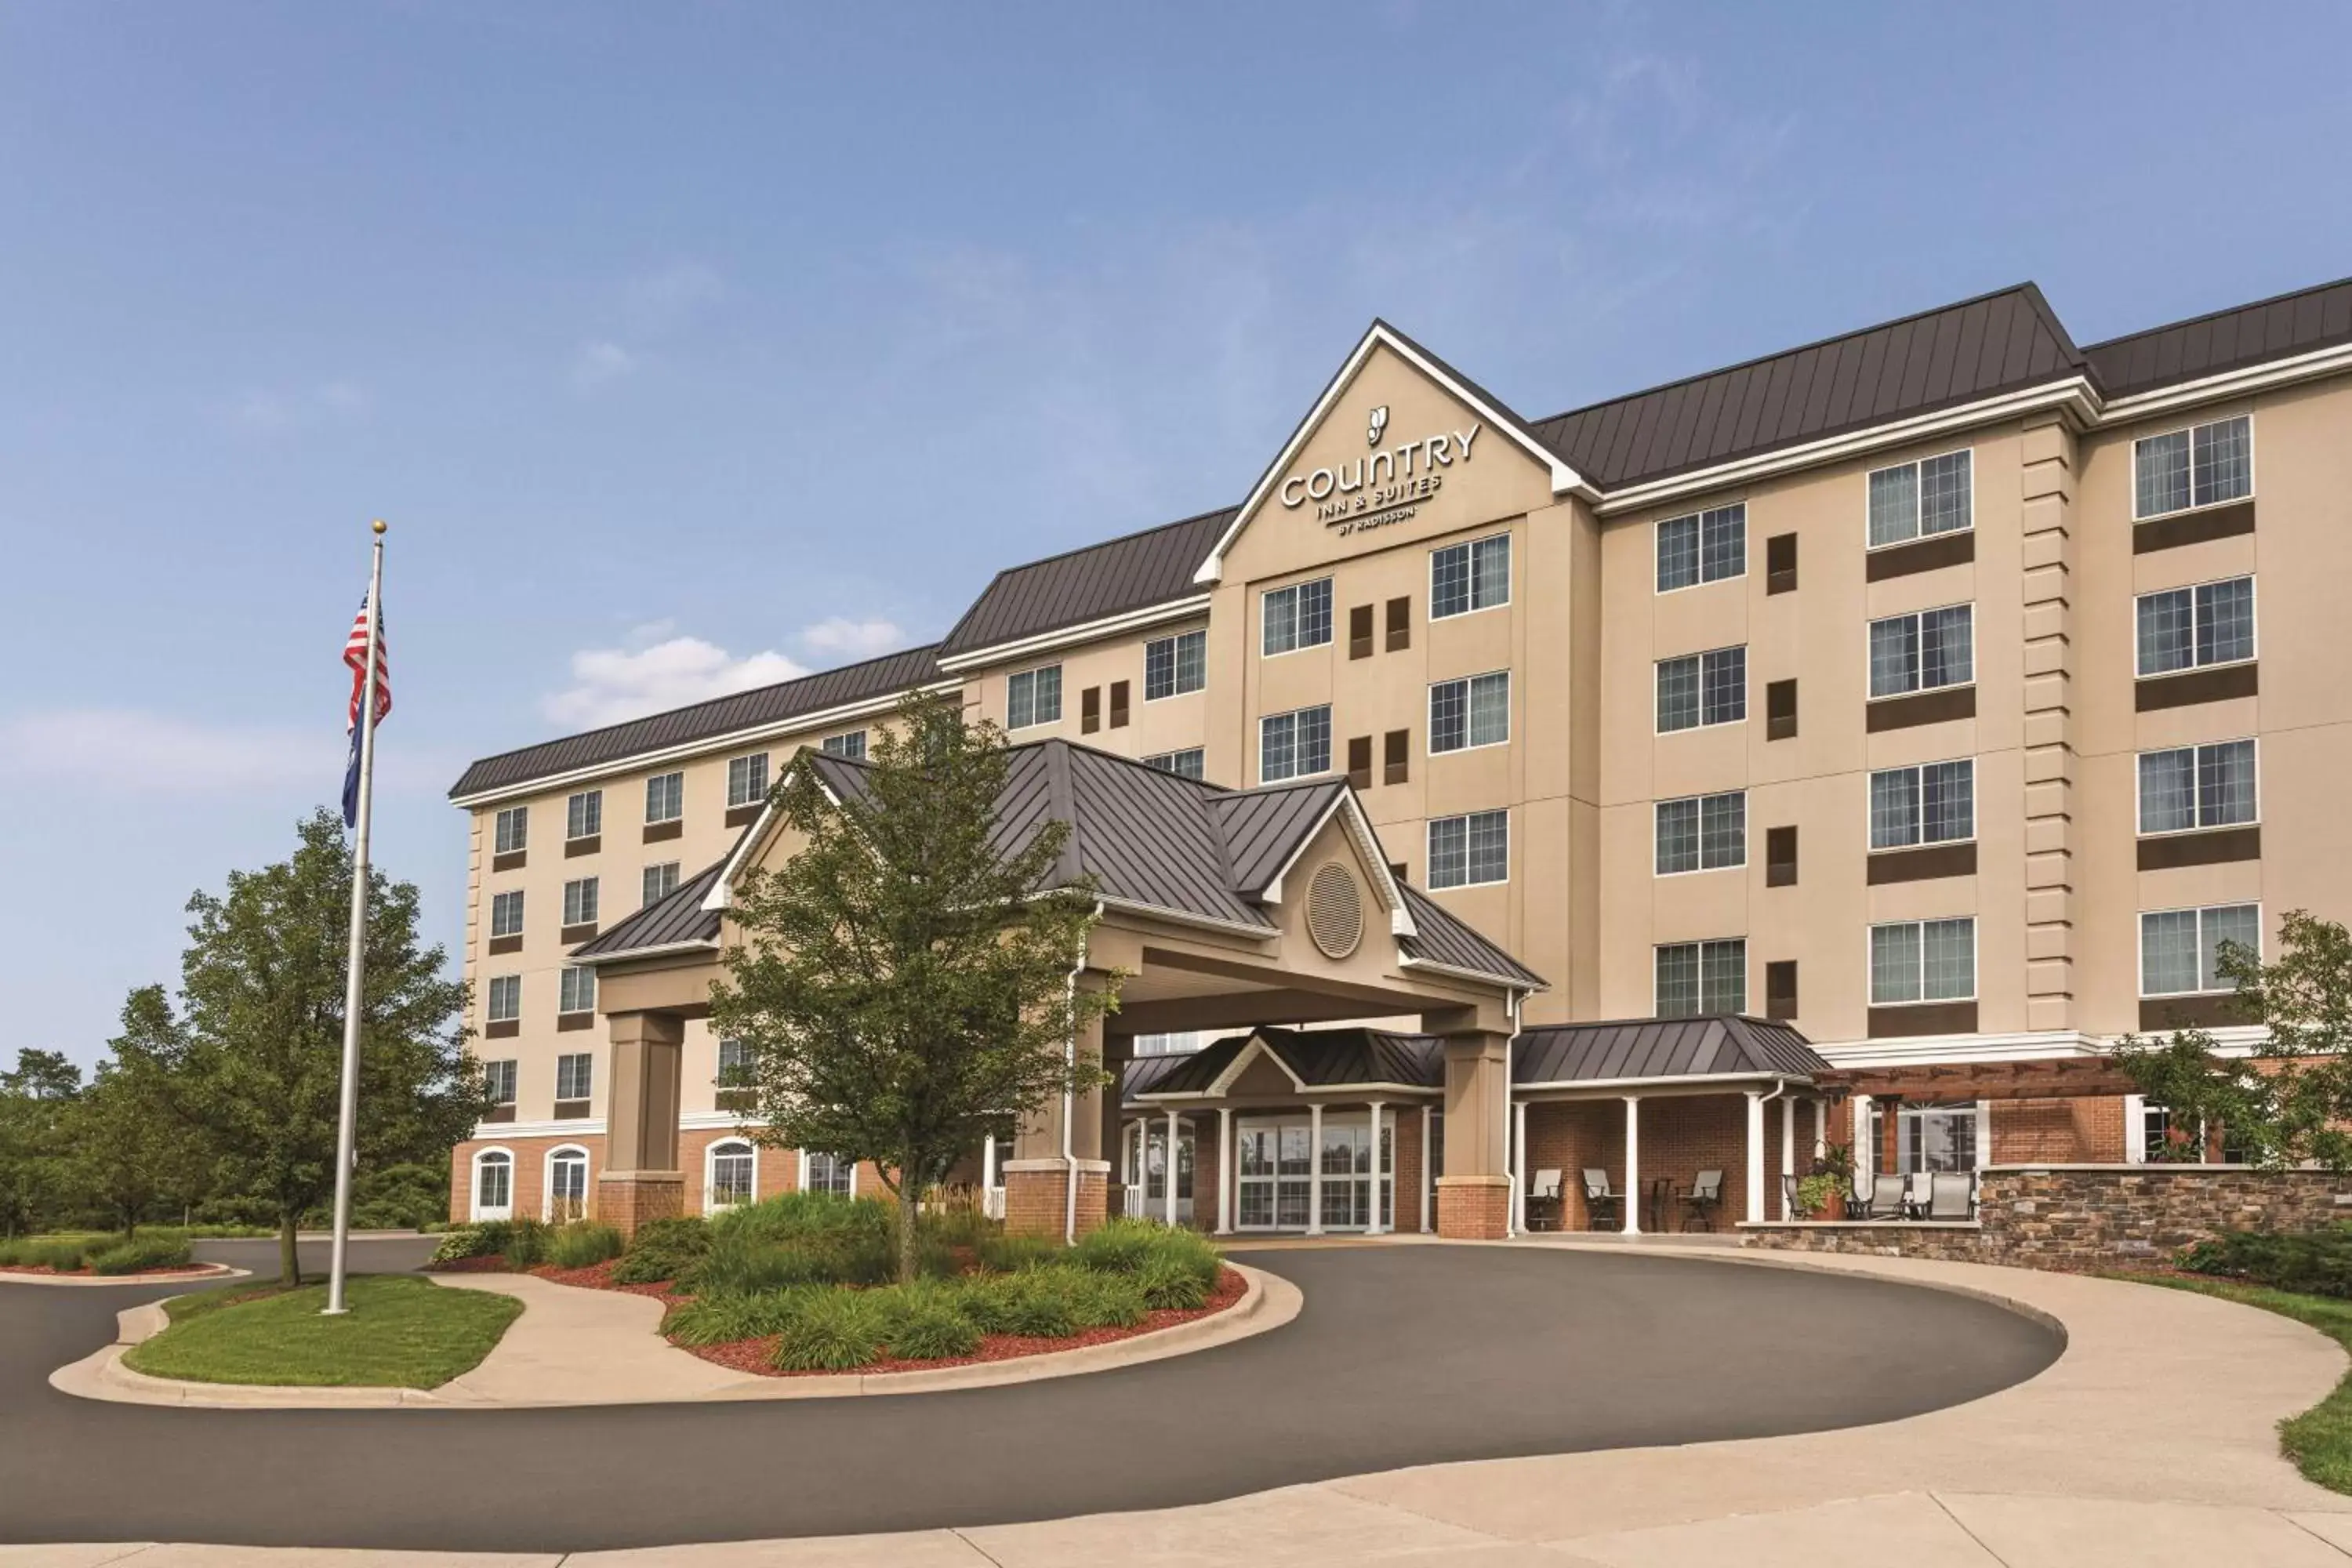 Property Building in Country Inn & Suites by Radisson, Grand Rapids East, MI